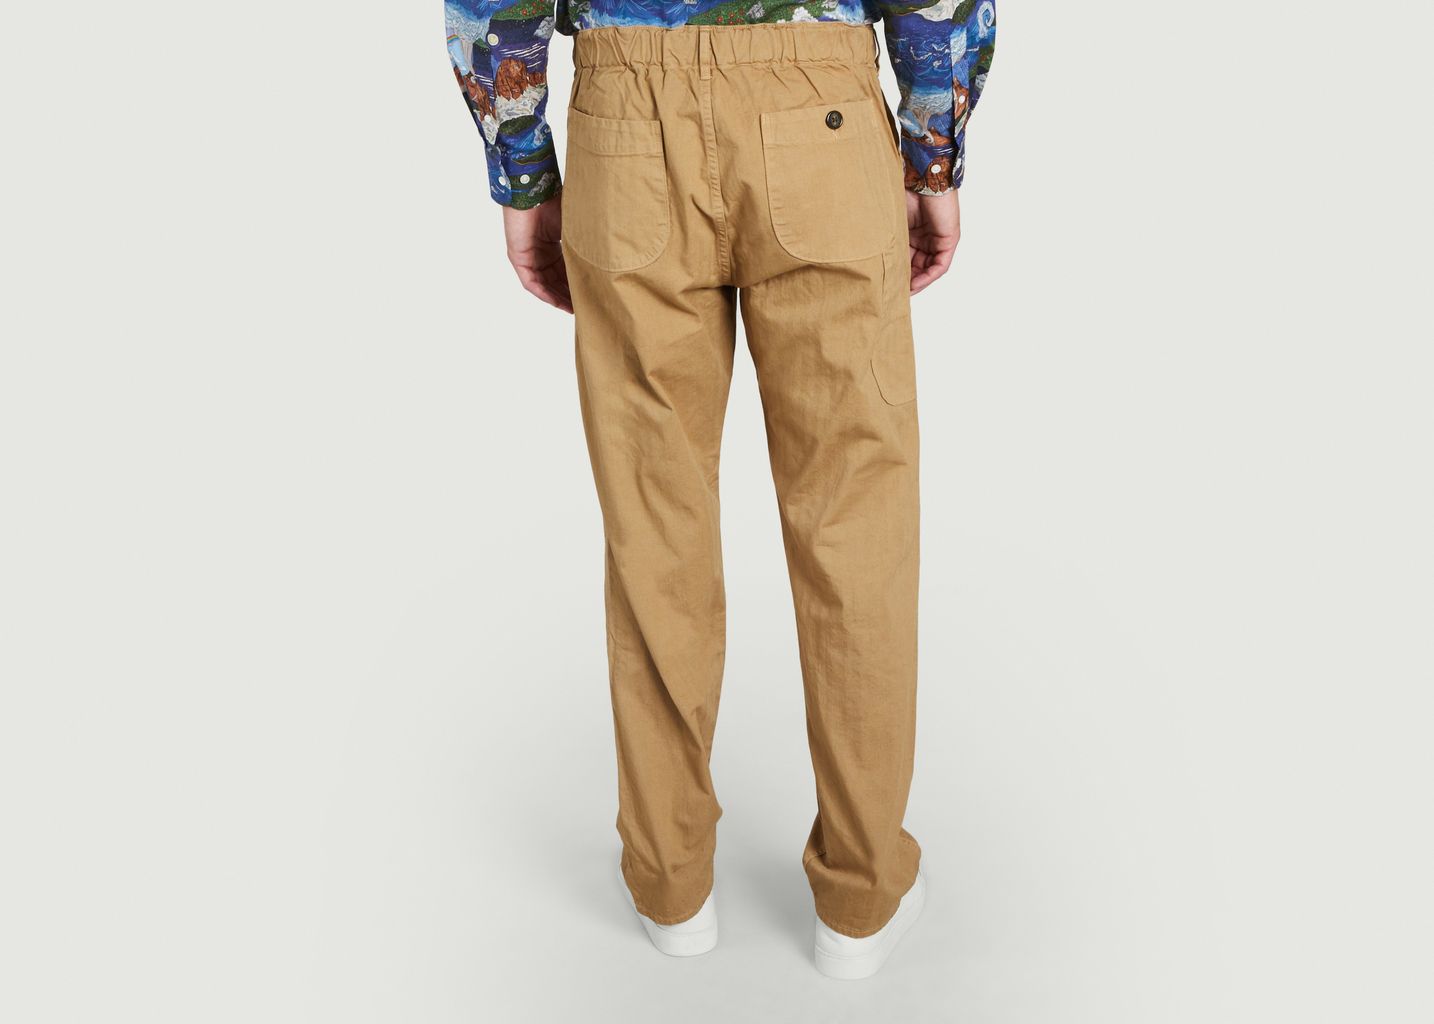 French work pants - orSlow